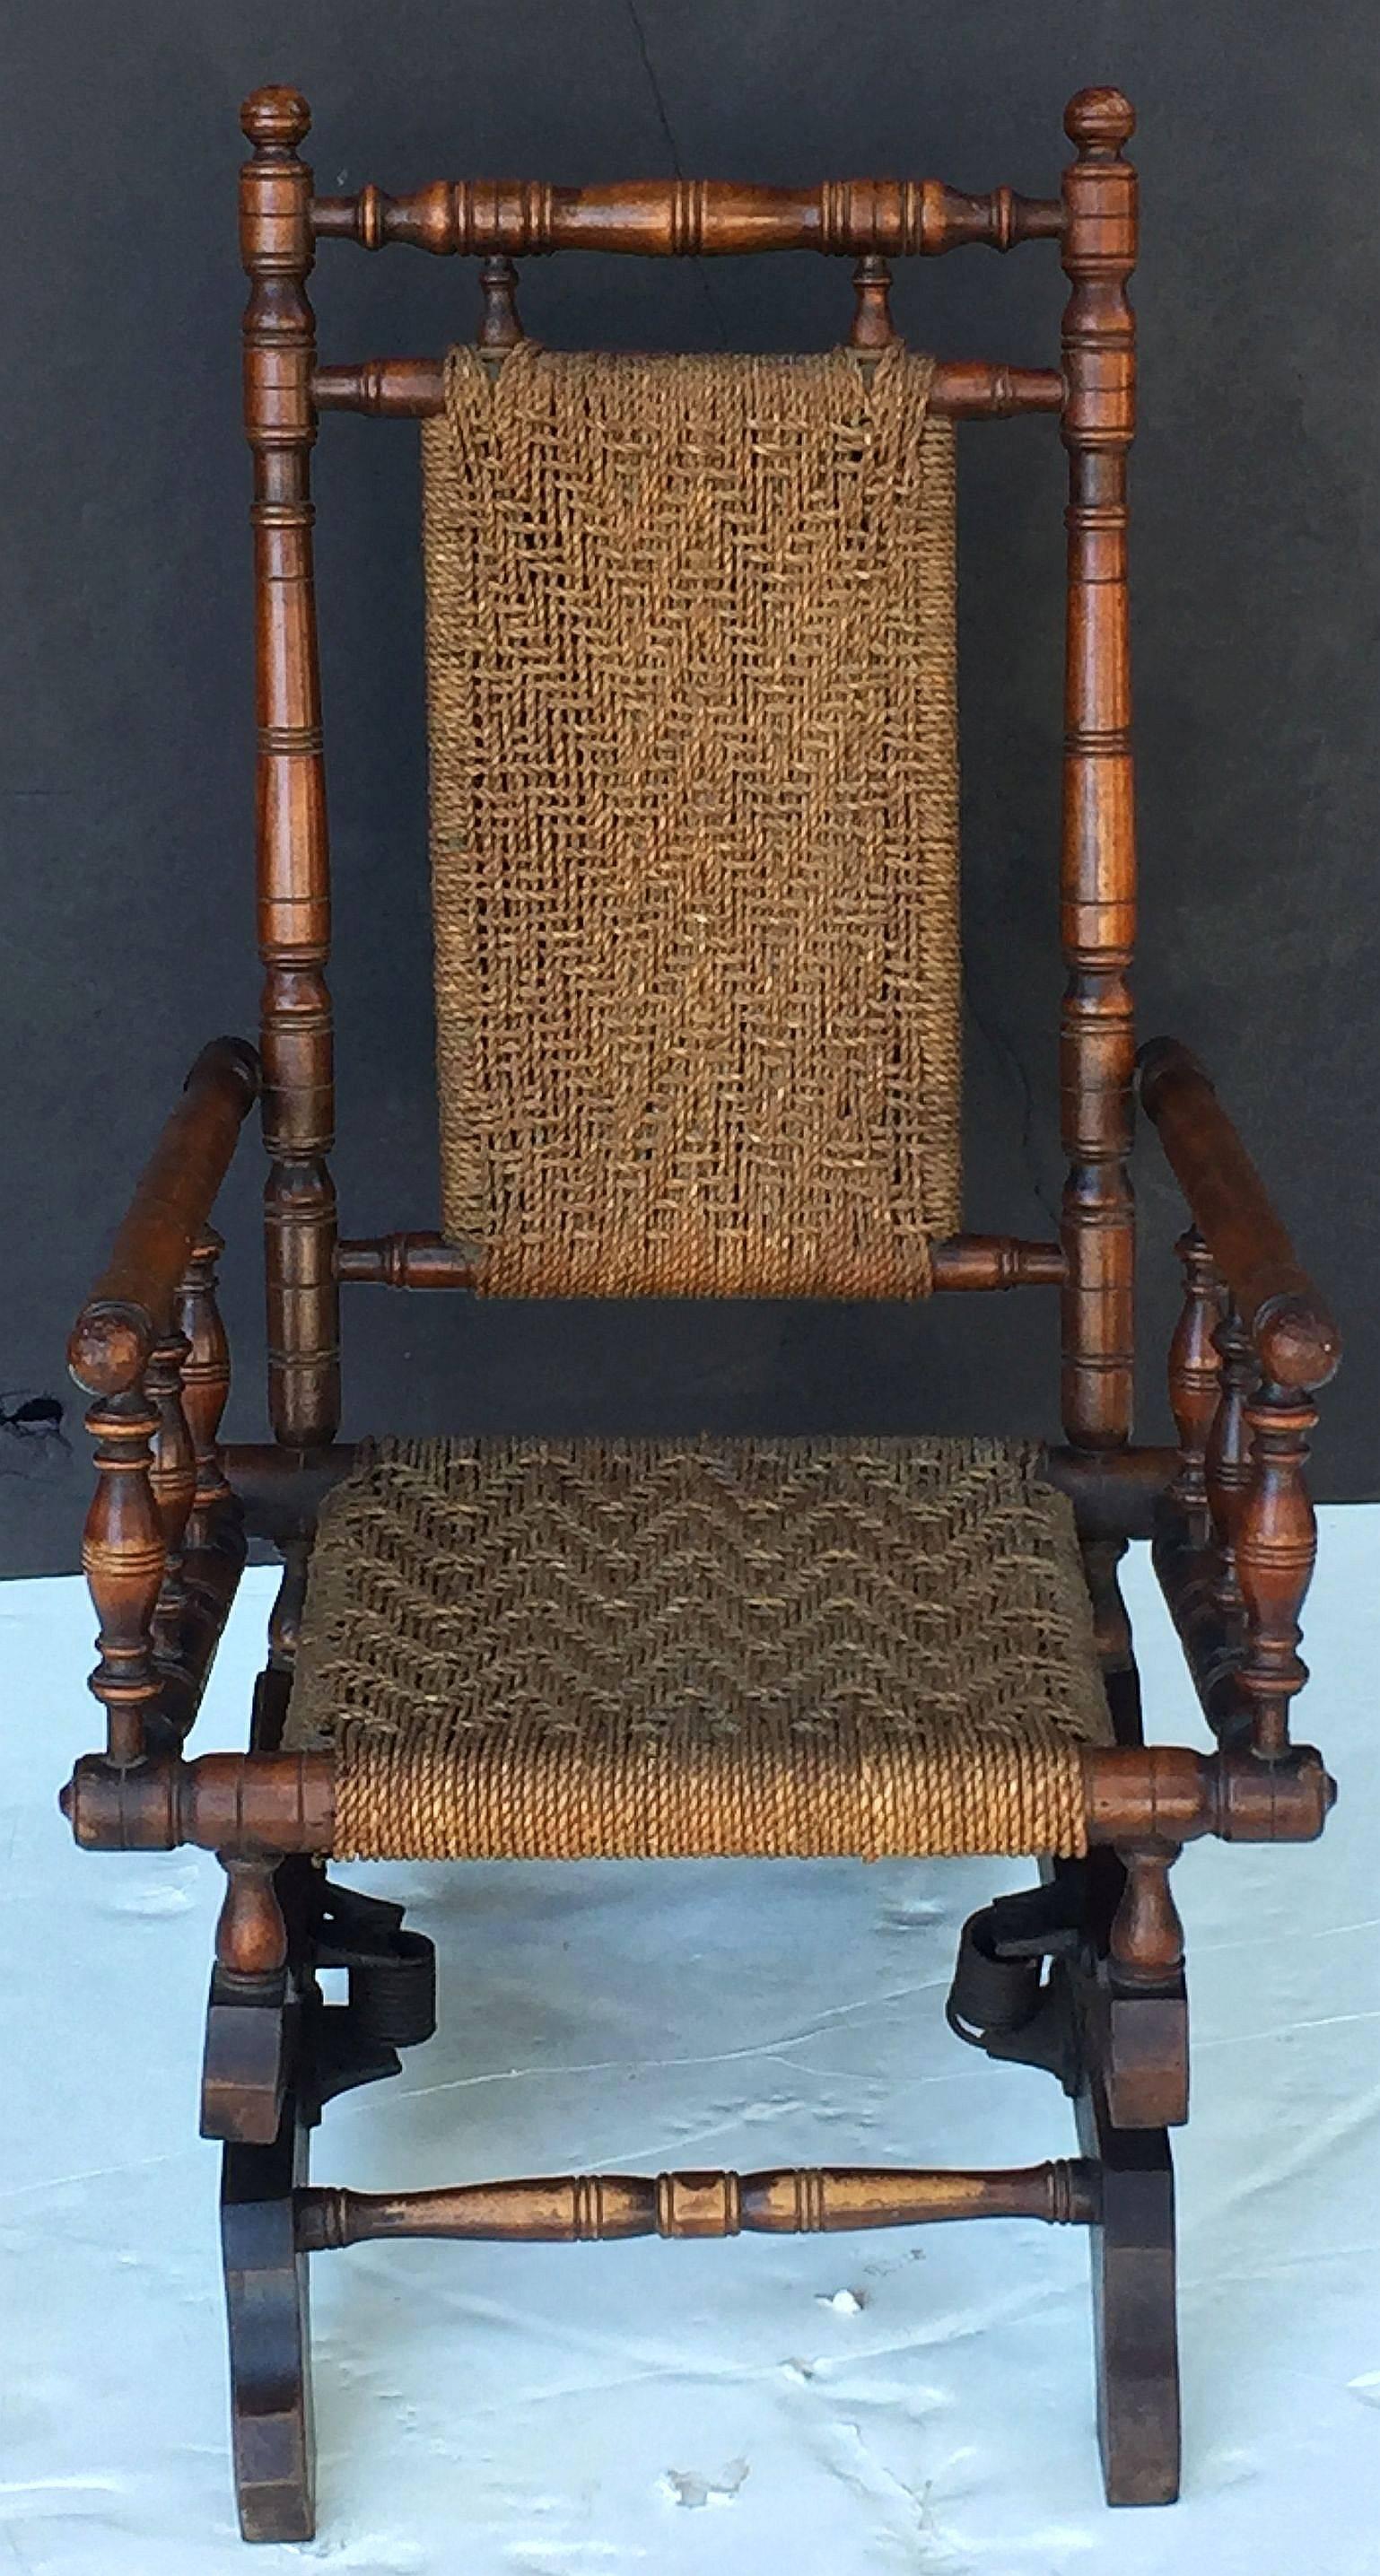 A fine English child's rocking chair in the American style, featuring the working design of an adult-sized chair but at a smaller scale.

Handsomely turned spindle frame with woven string or rope back and seat, mounted to a serpentine support with